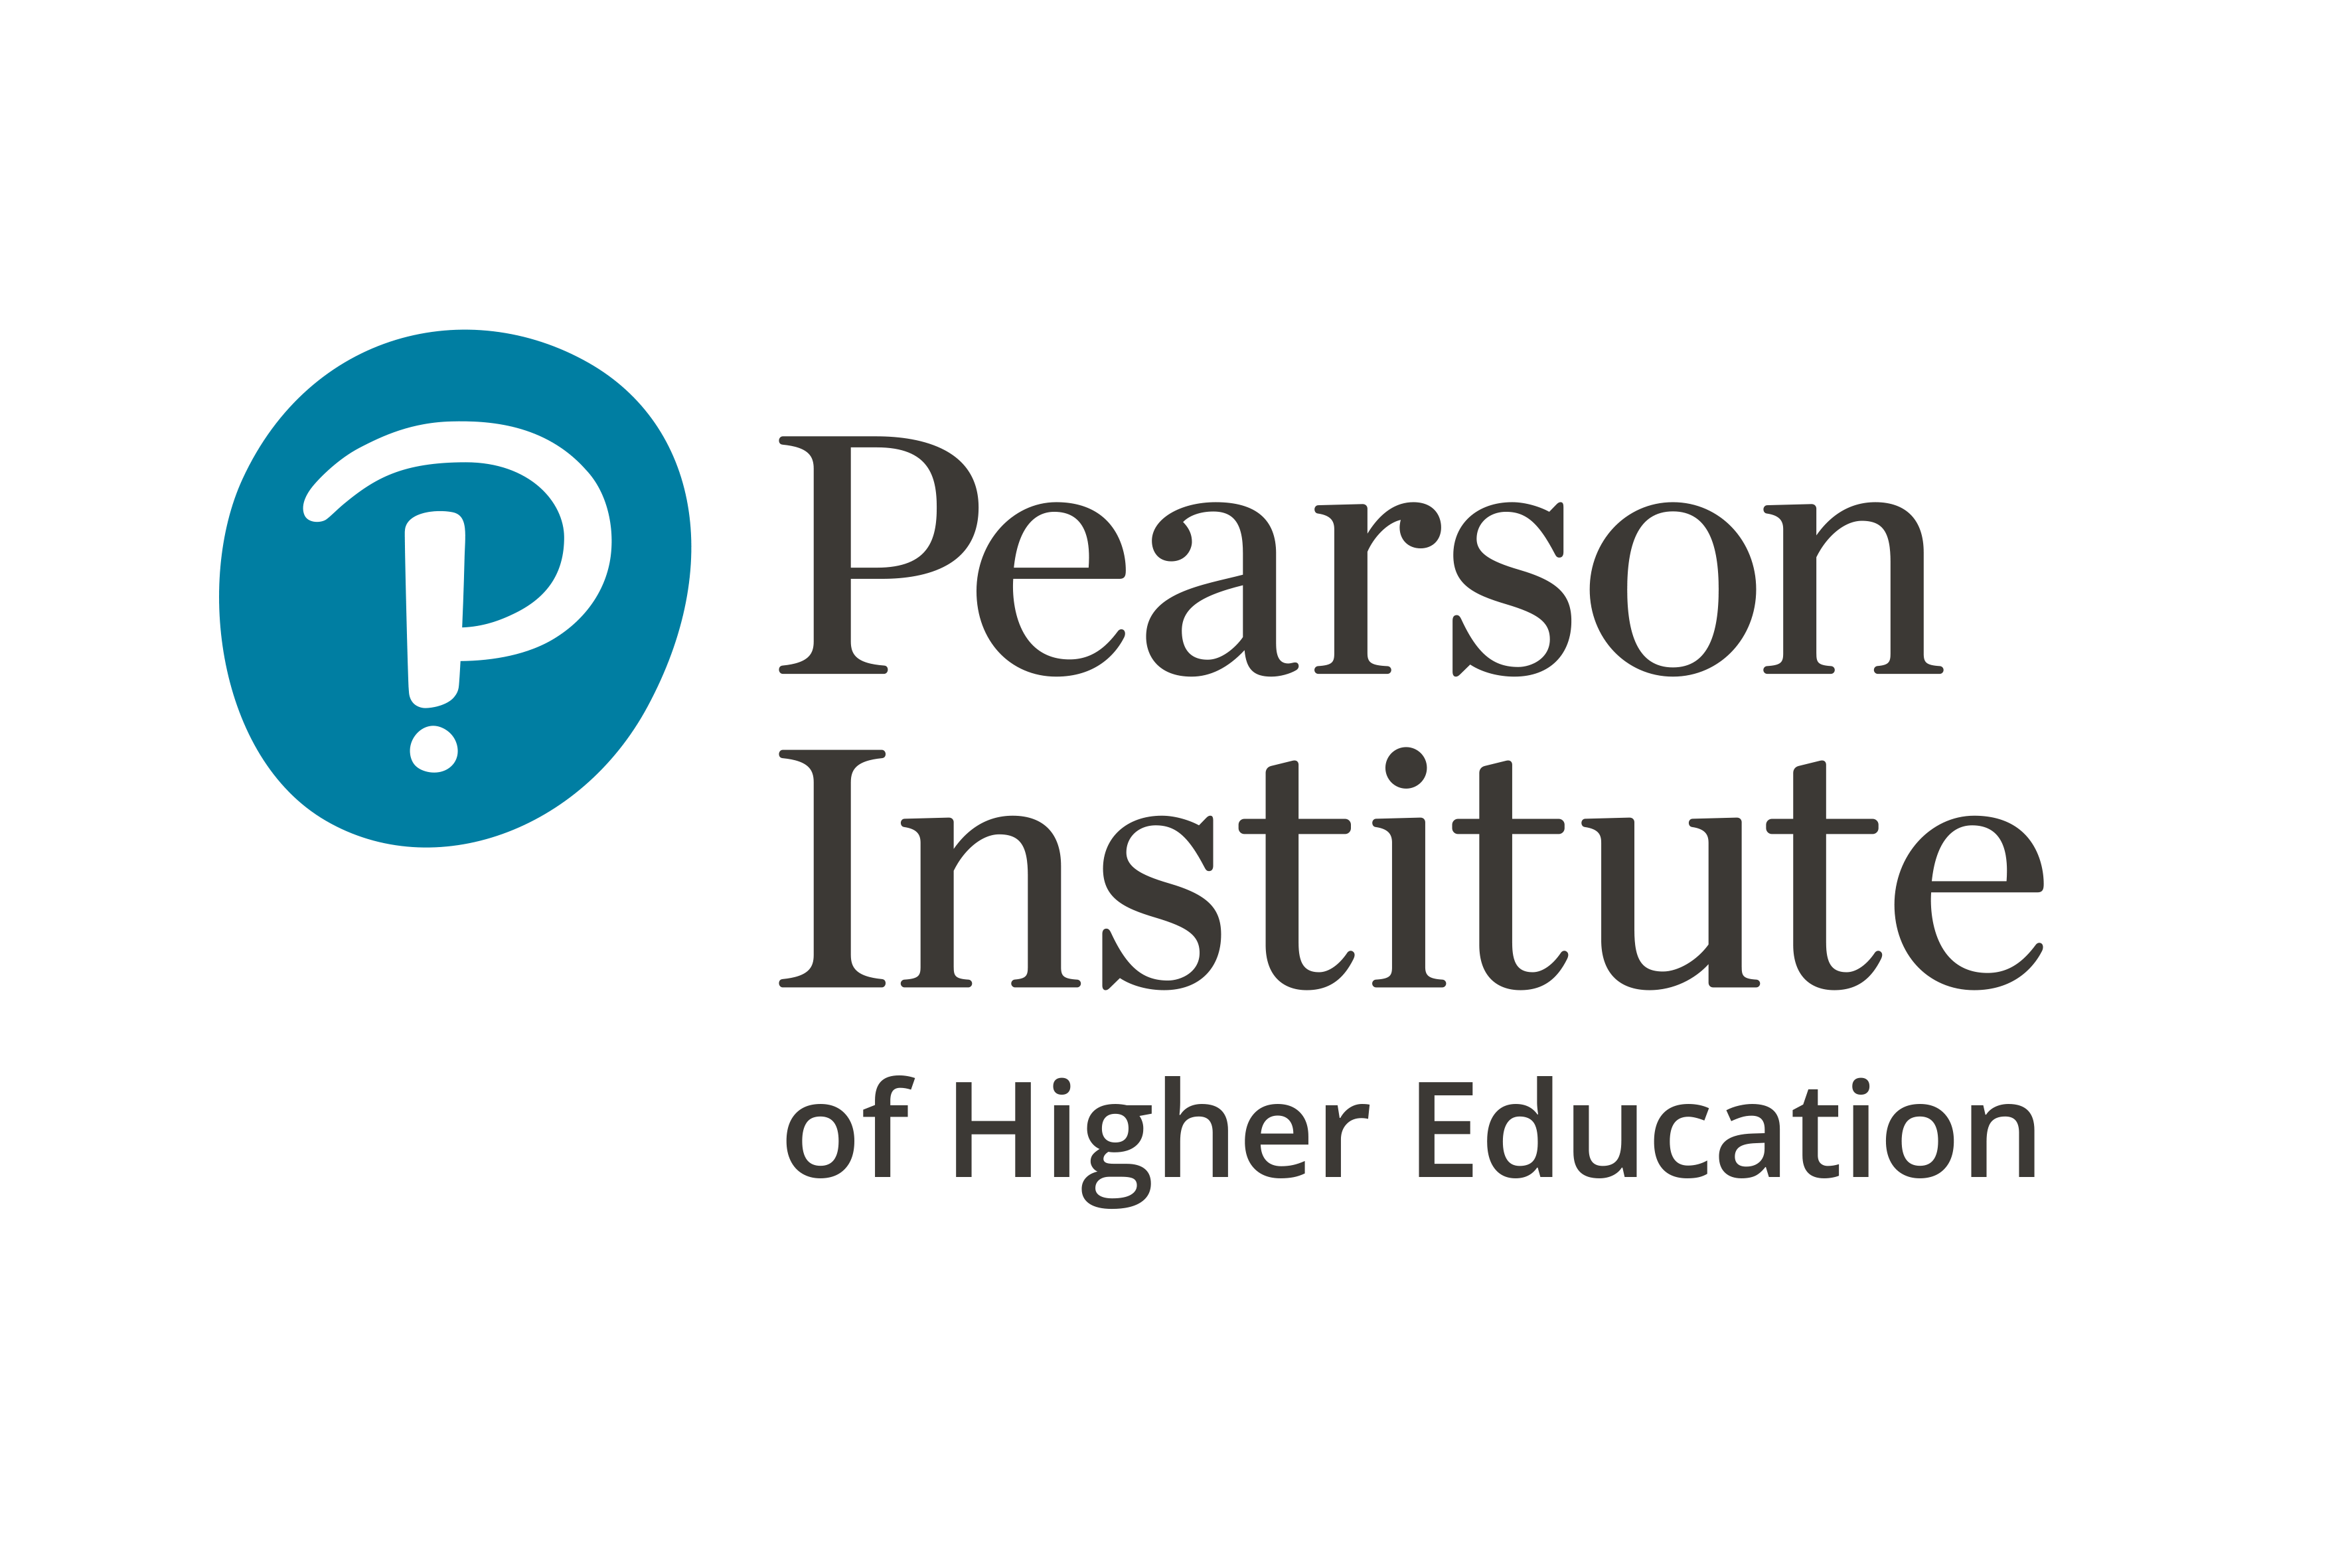 pearson education limited